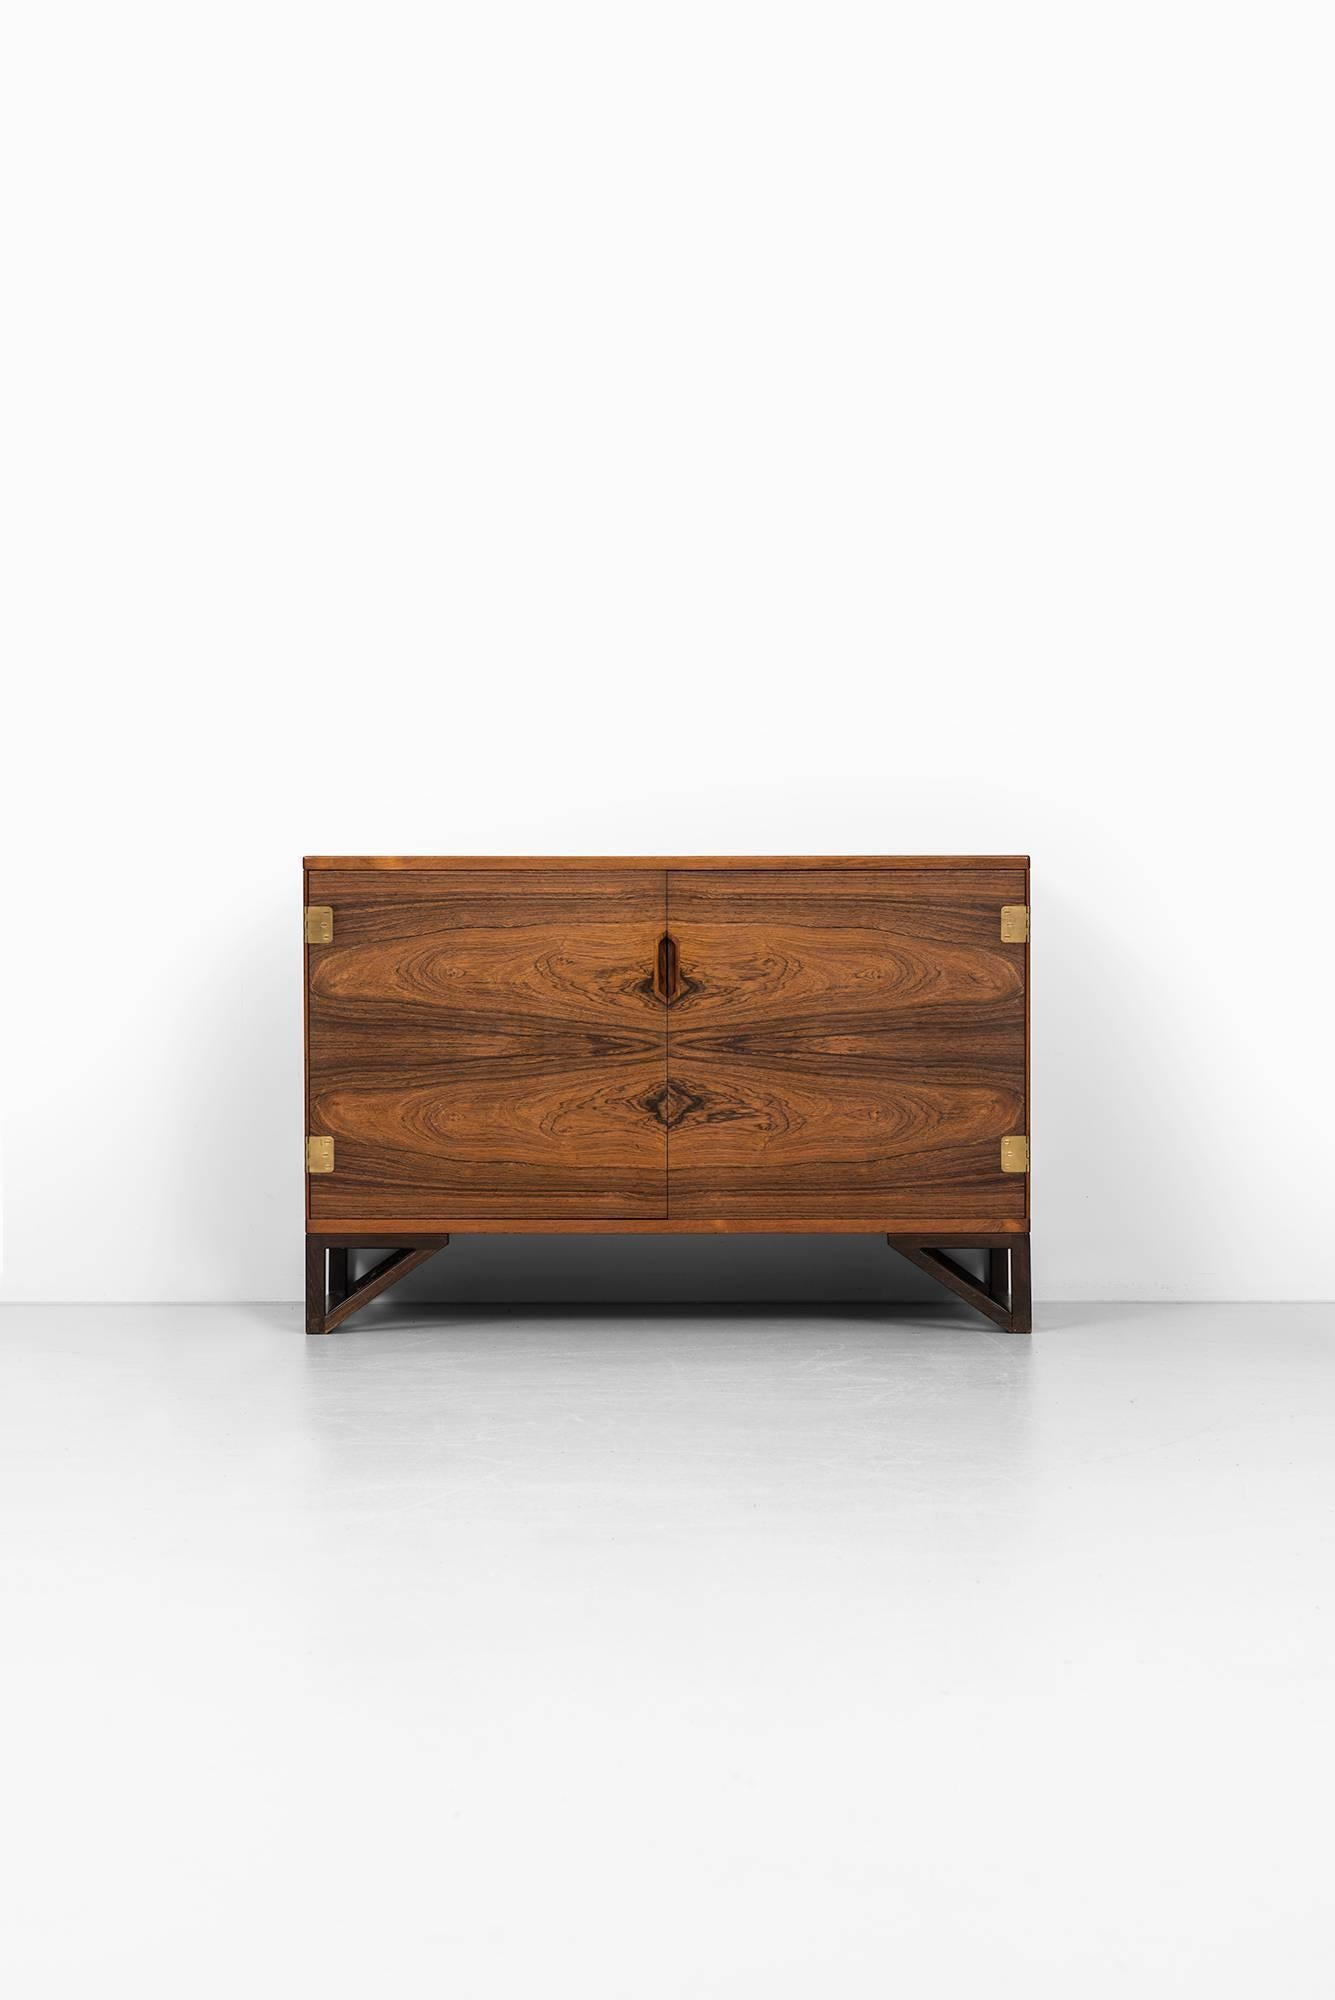 Rare cabinet or sideboard designed by Svend Langkilde. Produced by Illums Bolighus in Denmark.